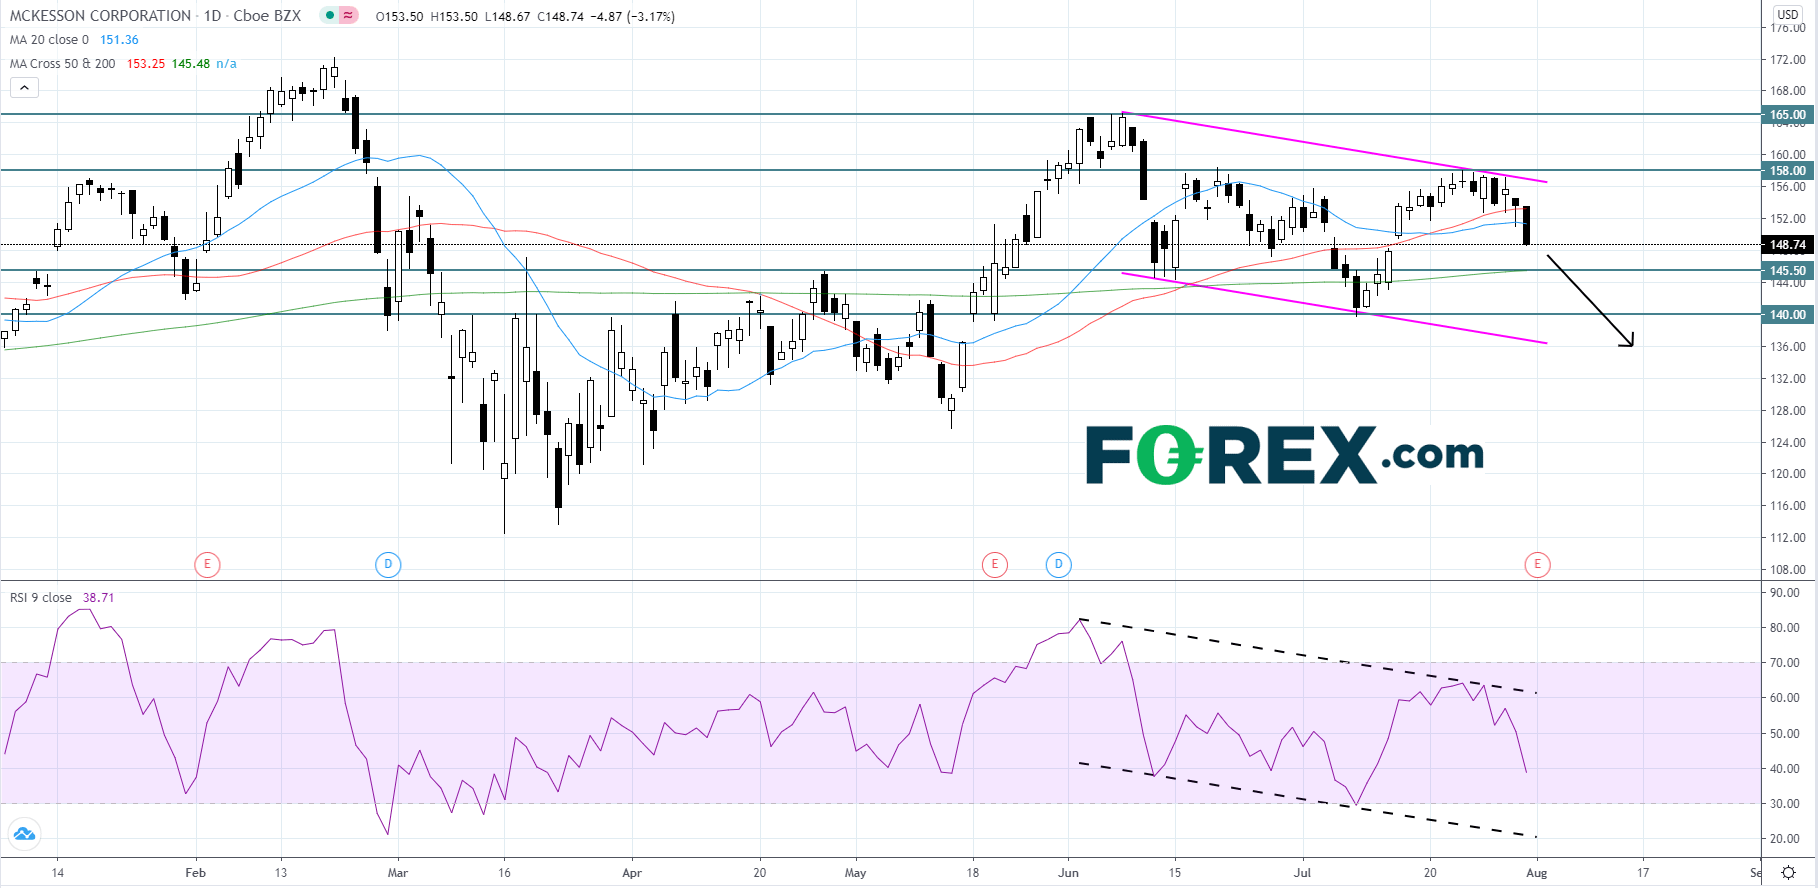 Chart analysis of McKesson stock. Published in July 2020 by FOREX.com